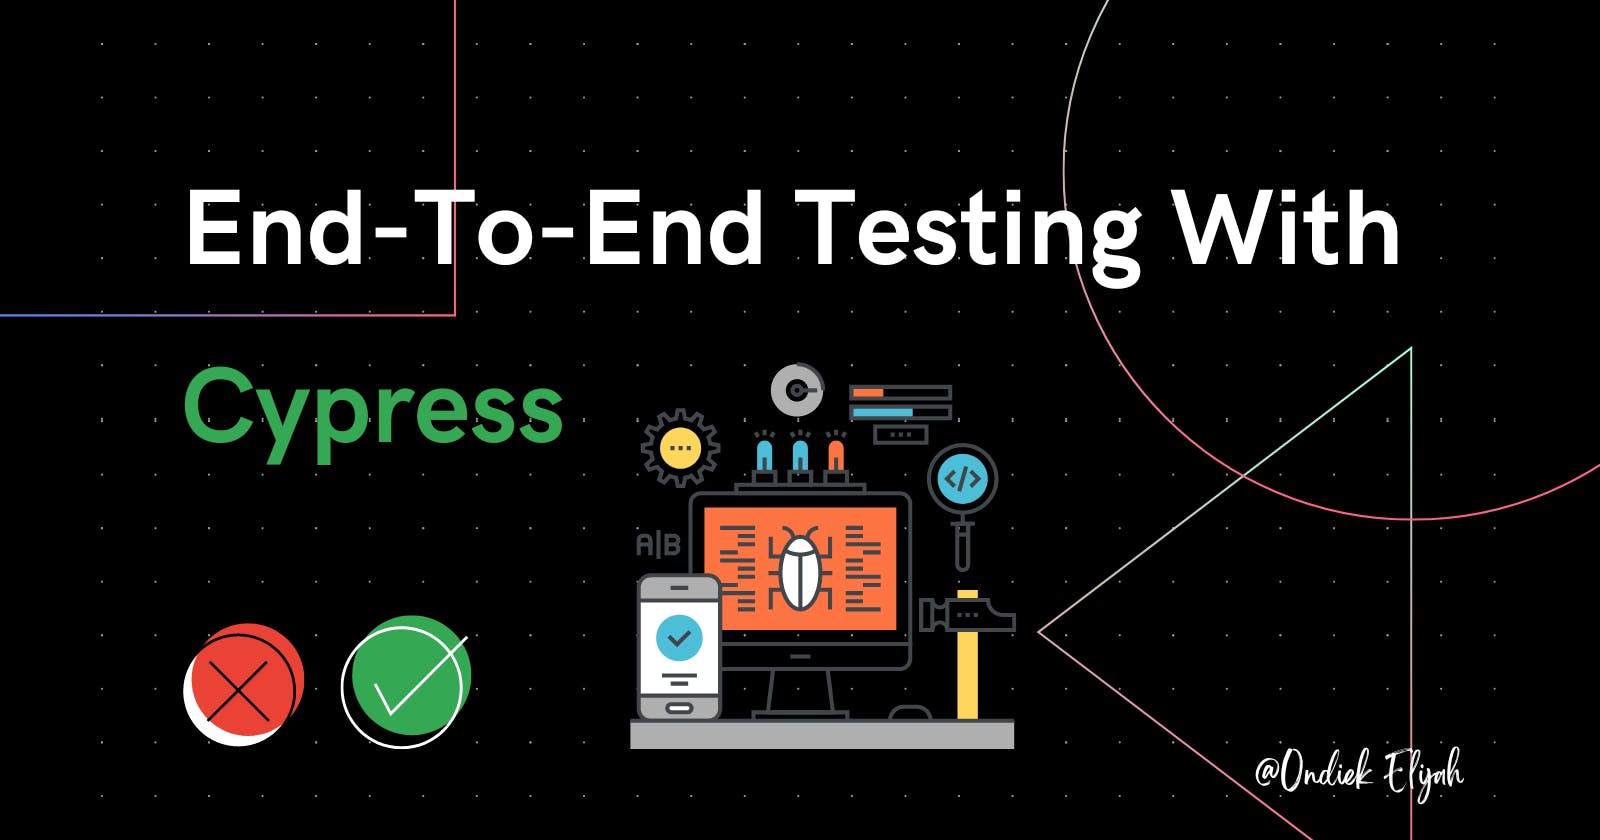 End-To-End Testing With Cypress